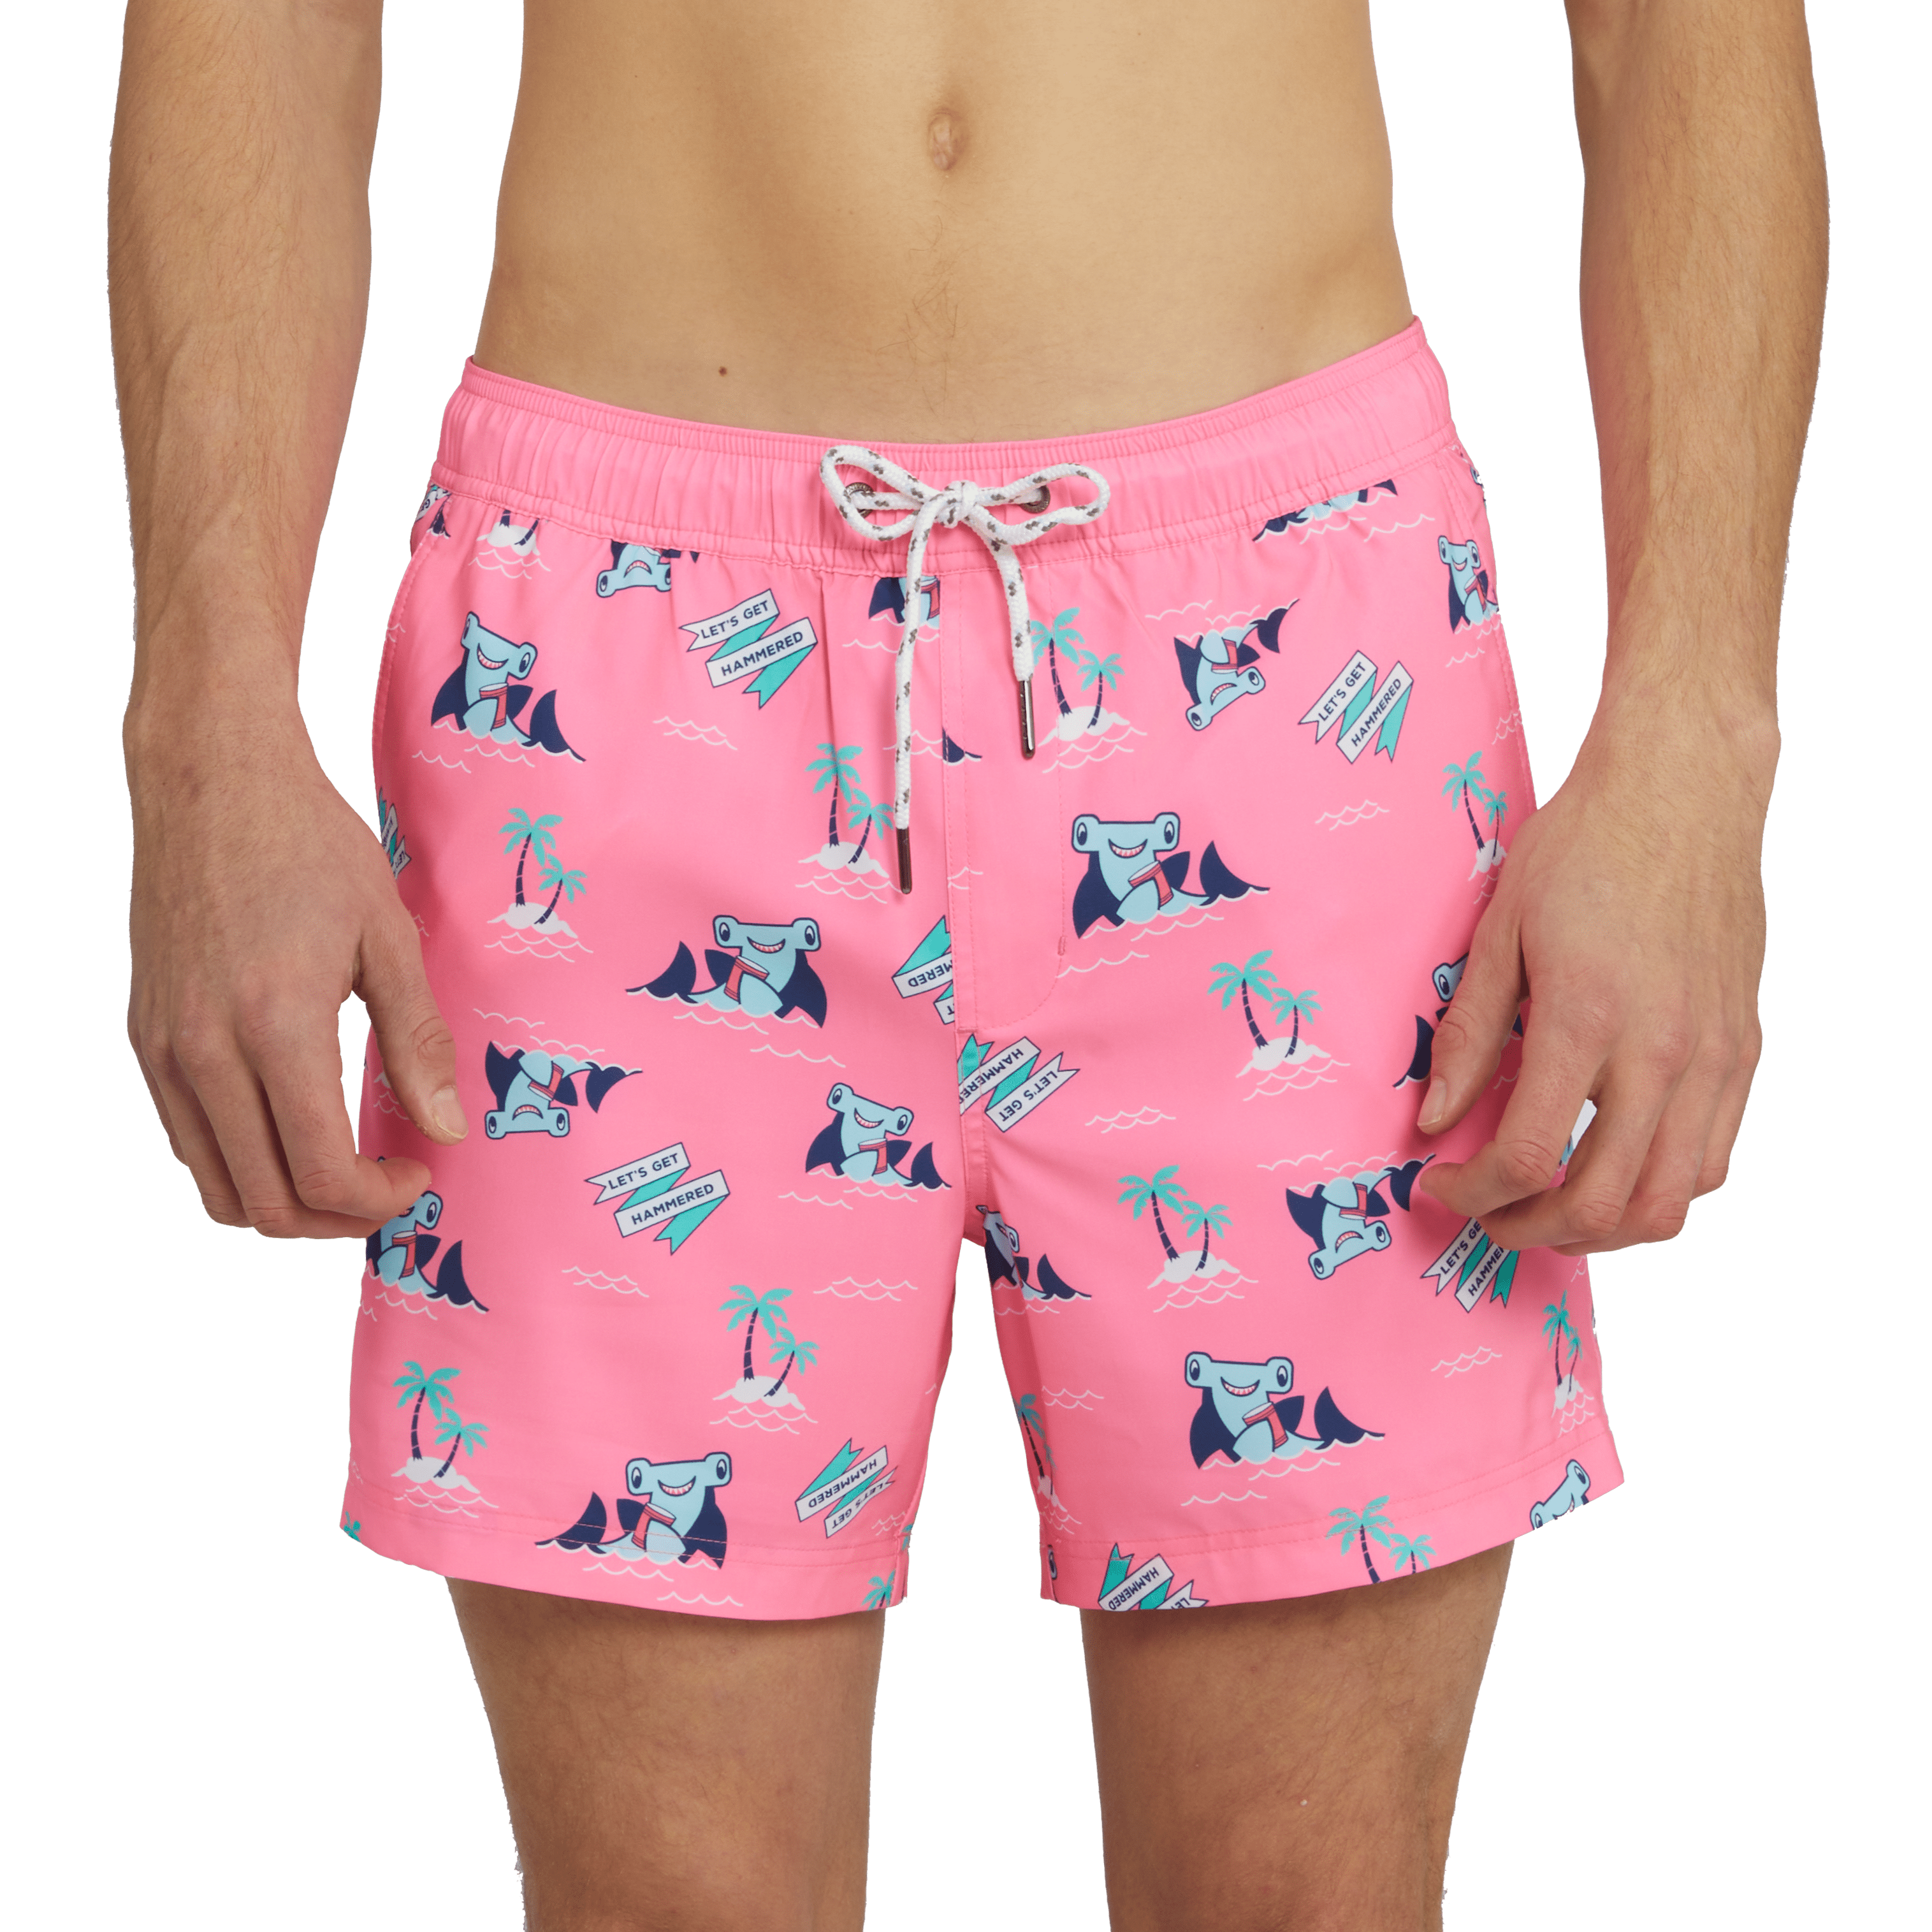 HAMMERTIME PARTY STARTER SHORT - NEON PINK PRINTED SHORTS PARTY PANTS 